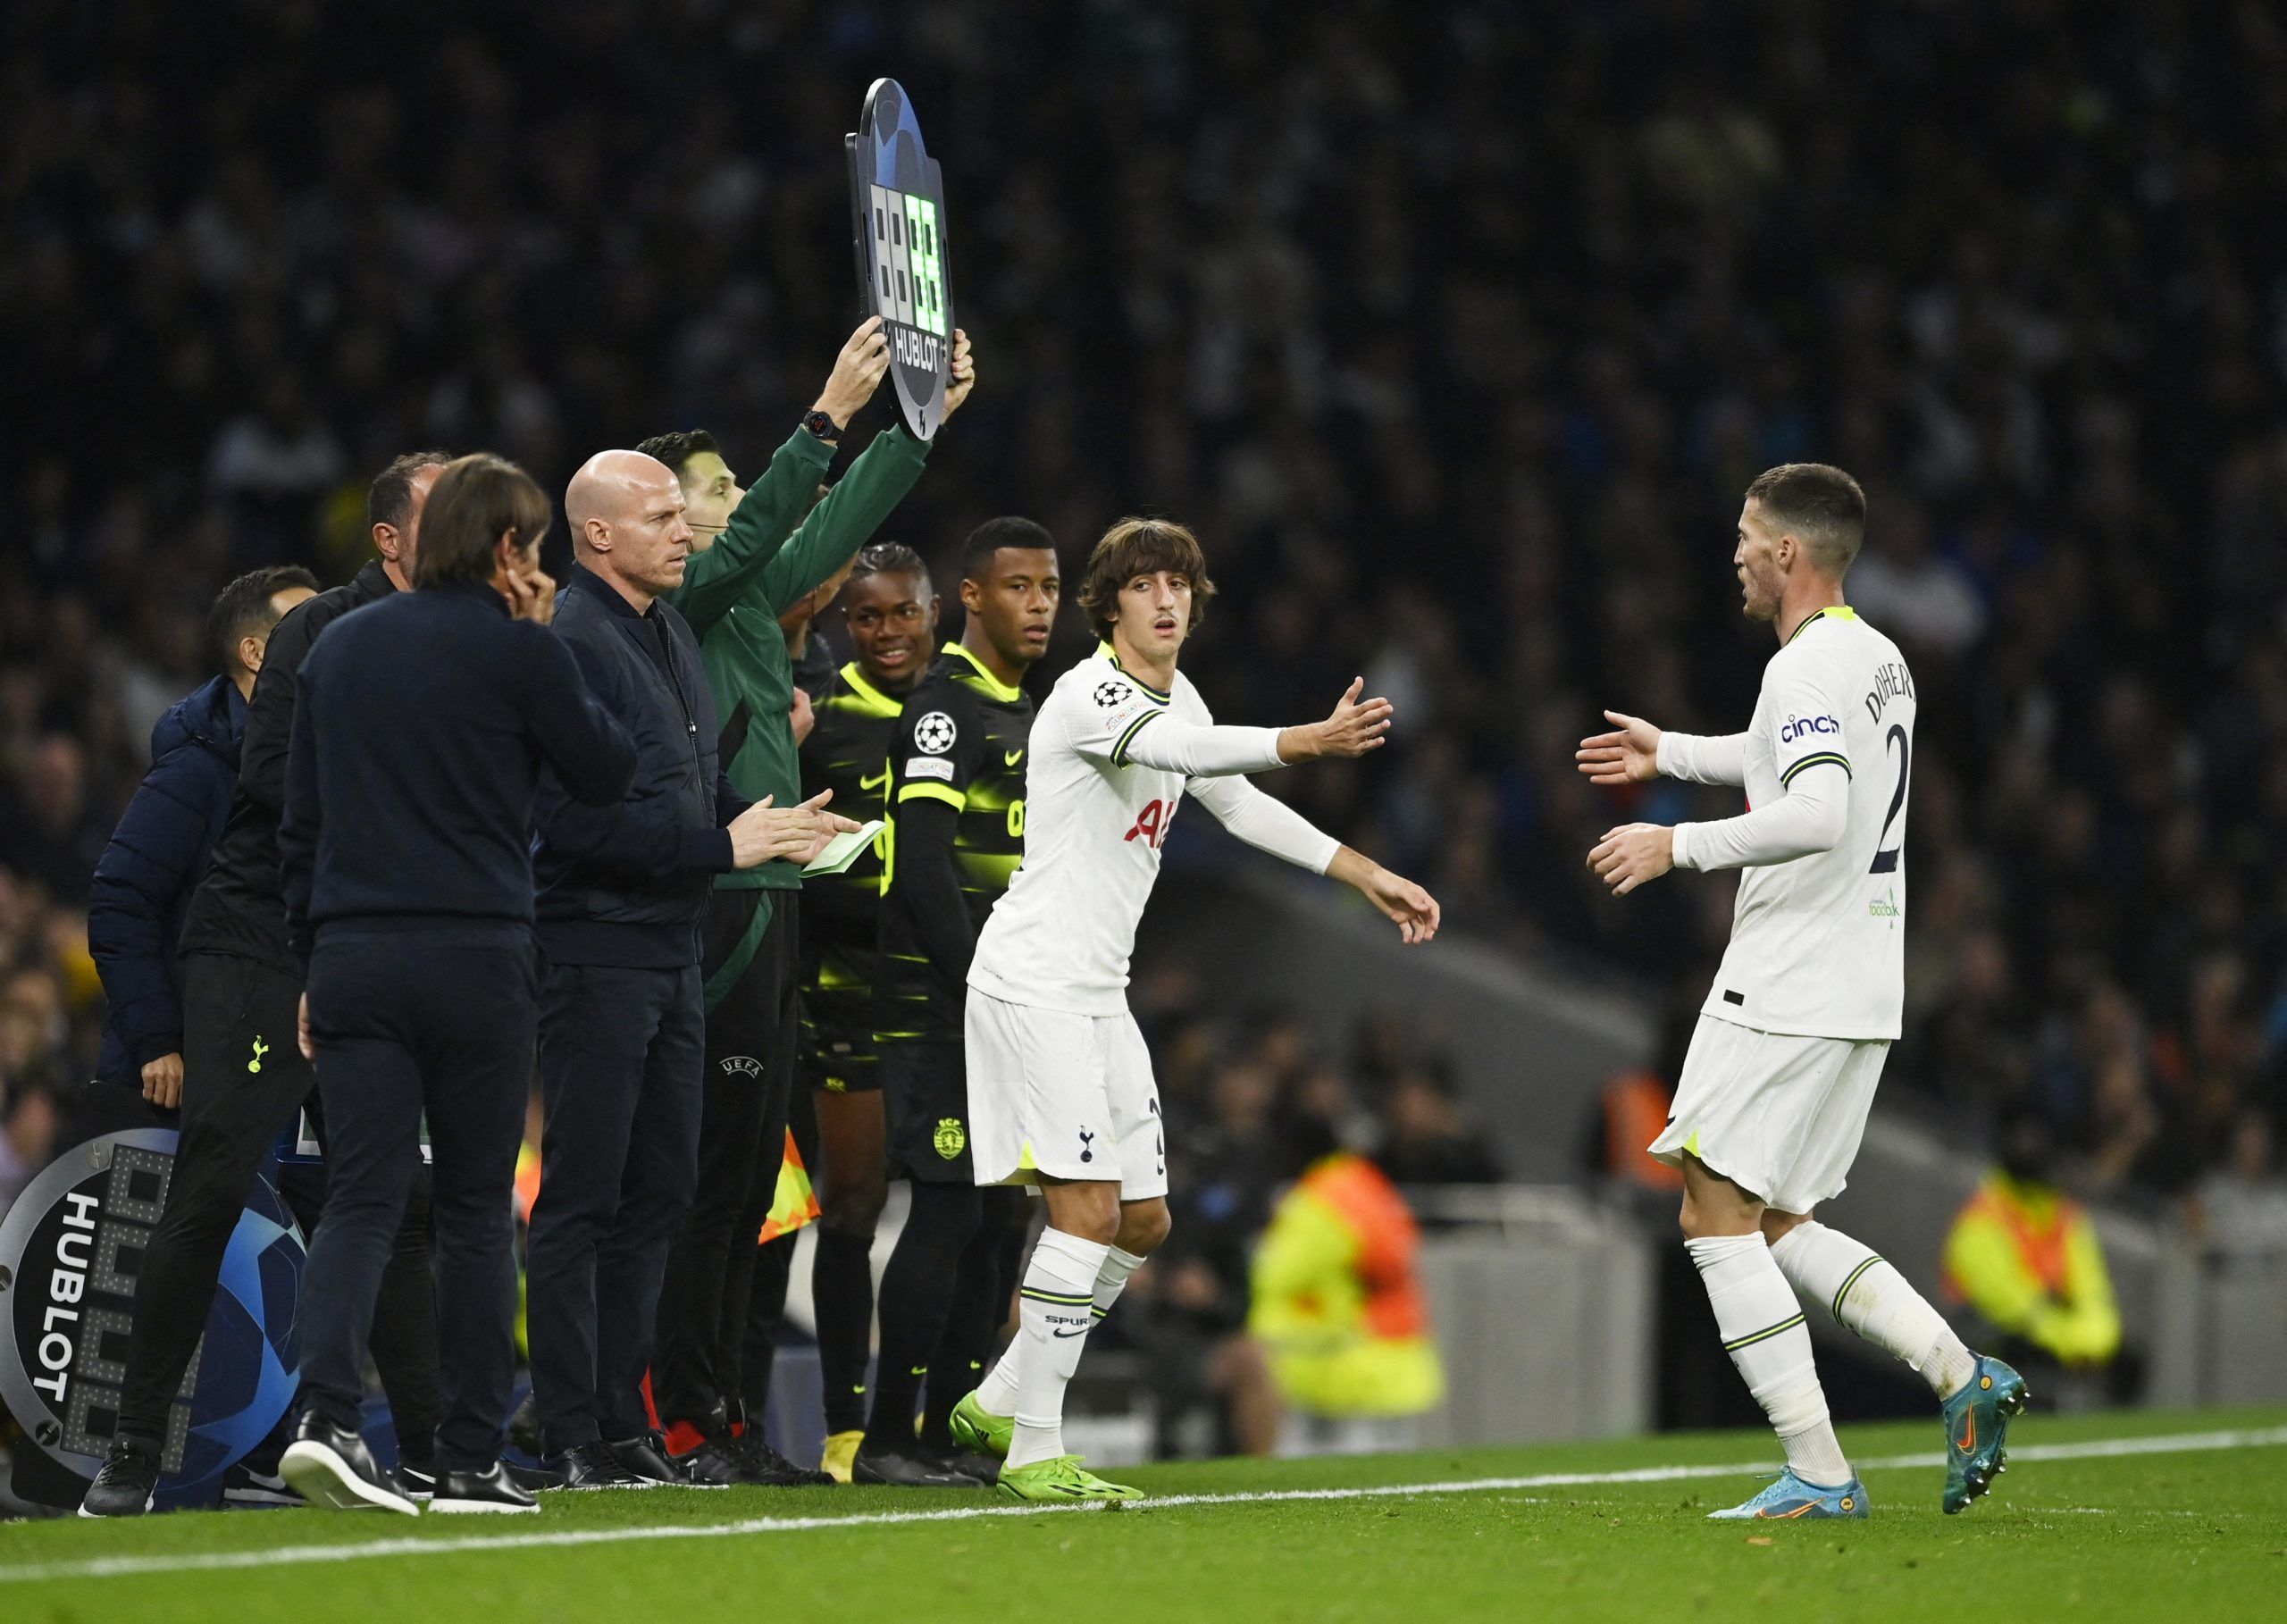 Soccer Football - Champions League - Group D - Tottenham Hotspur v Sporting CP - Tottenham Hotspur Stadium, London, Britain - October 26, 2022 Tottenham Hotspur's Bryan Gil comes on as a substitute to replace Matt Doherty as manager Antonio Conte looks on REUTERS/Tony Obrien